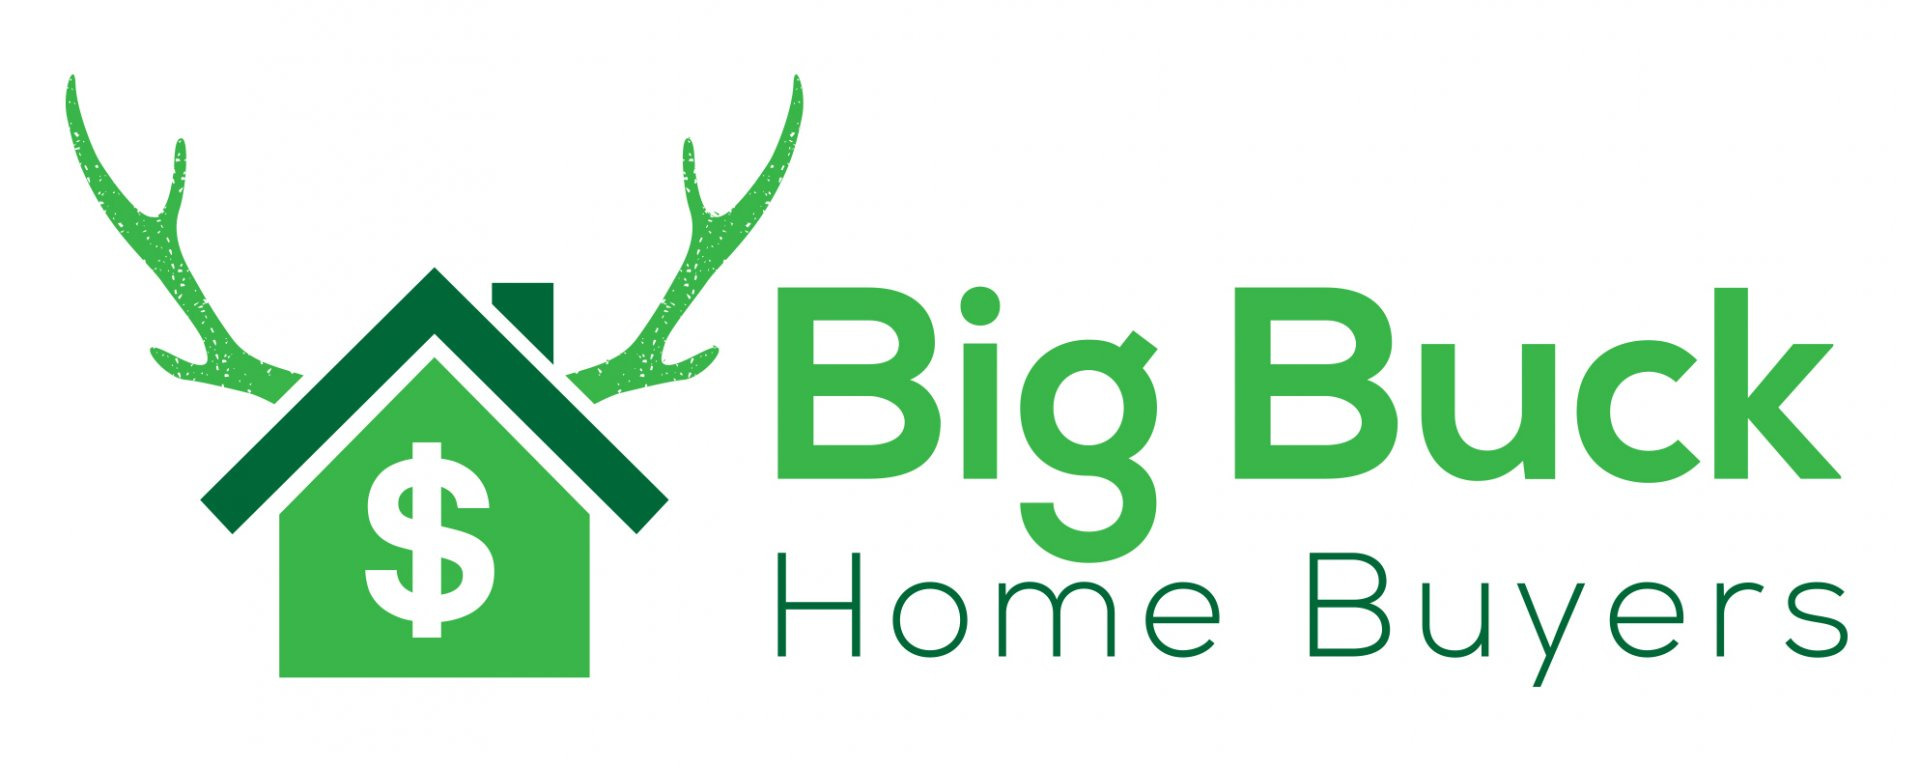 Big Buck Home Buyers Expands Into All Texas Markets Enabling Homeowners To Sell Their Homes Fast and Efficiently 18